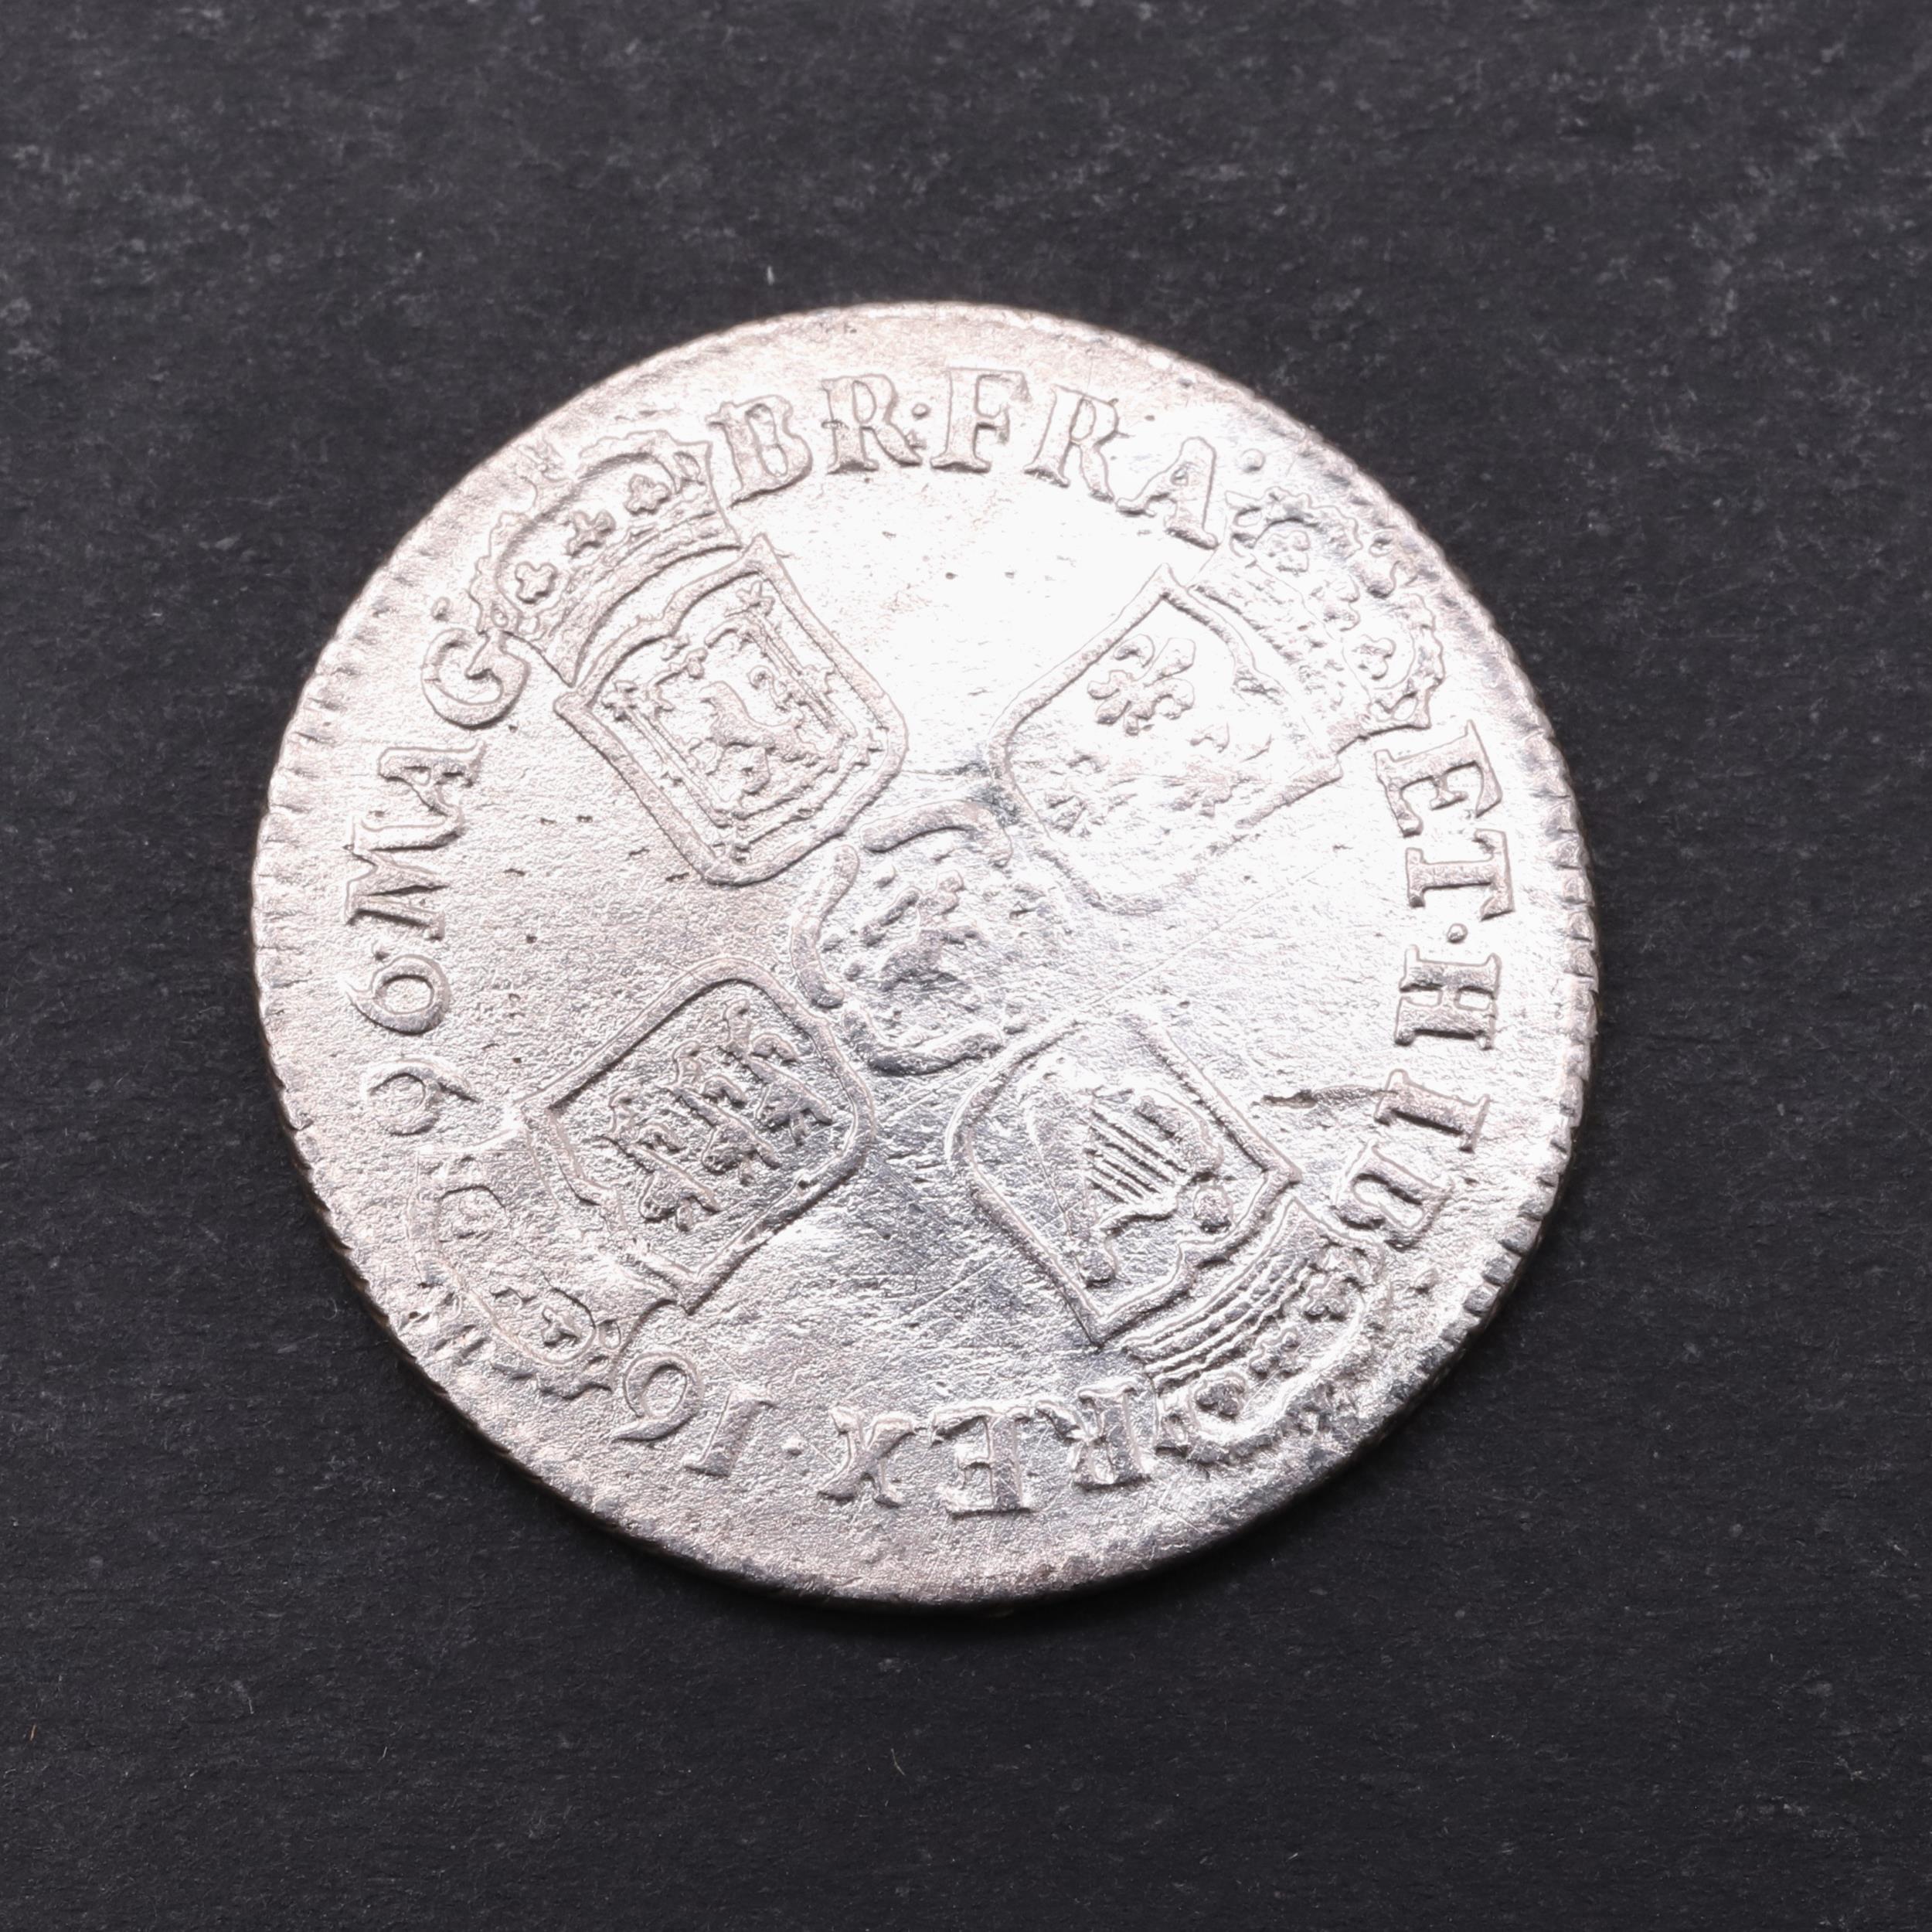 A WILLIAM III SHILLING, 1696, FROM THE WRECK OF THE ASSOCIATION. - Image 2 of 5